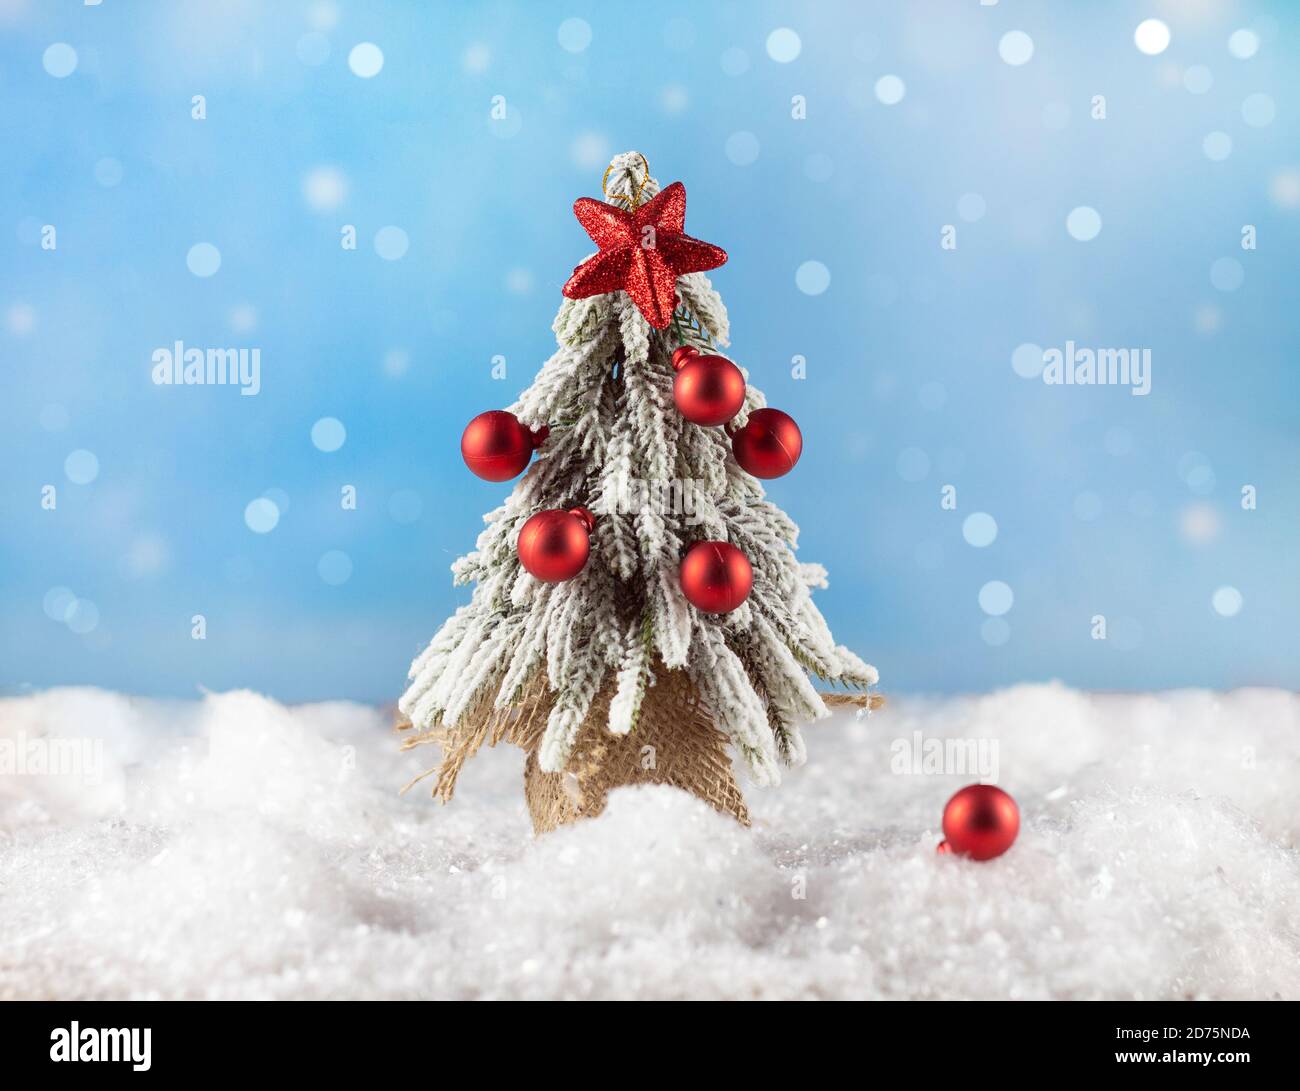 Flatley Christmas. Holiday Christmas background. New Year's and Christmas. Christmas card background with Christmas tree. Direct view. Copyspace Stock Photo